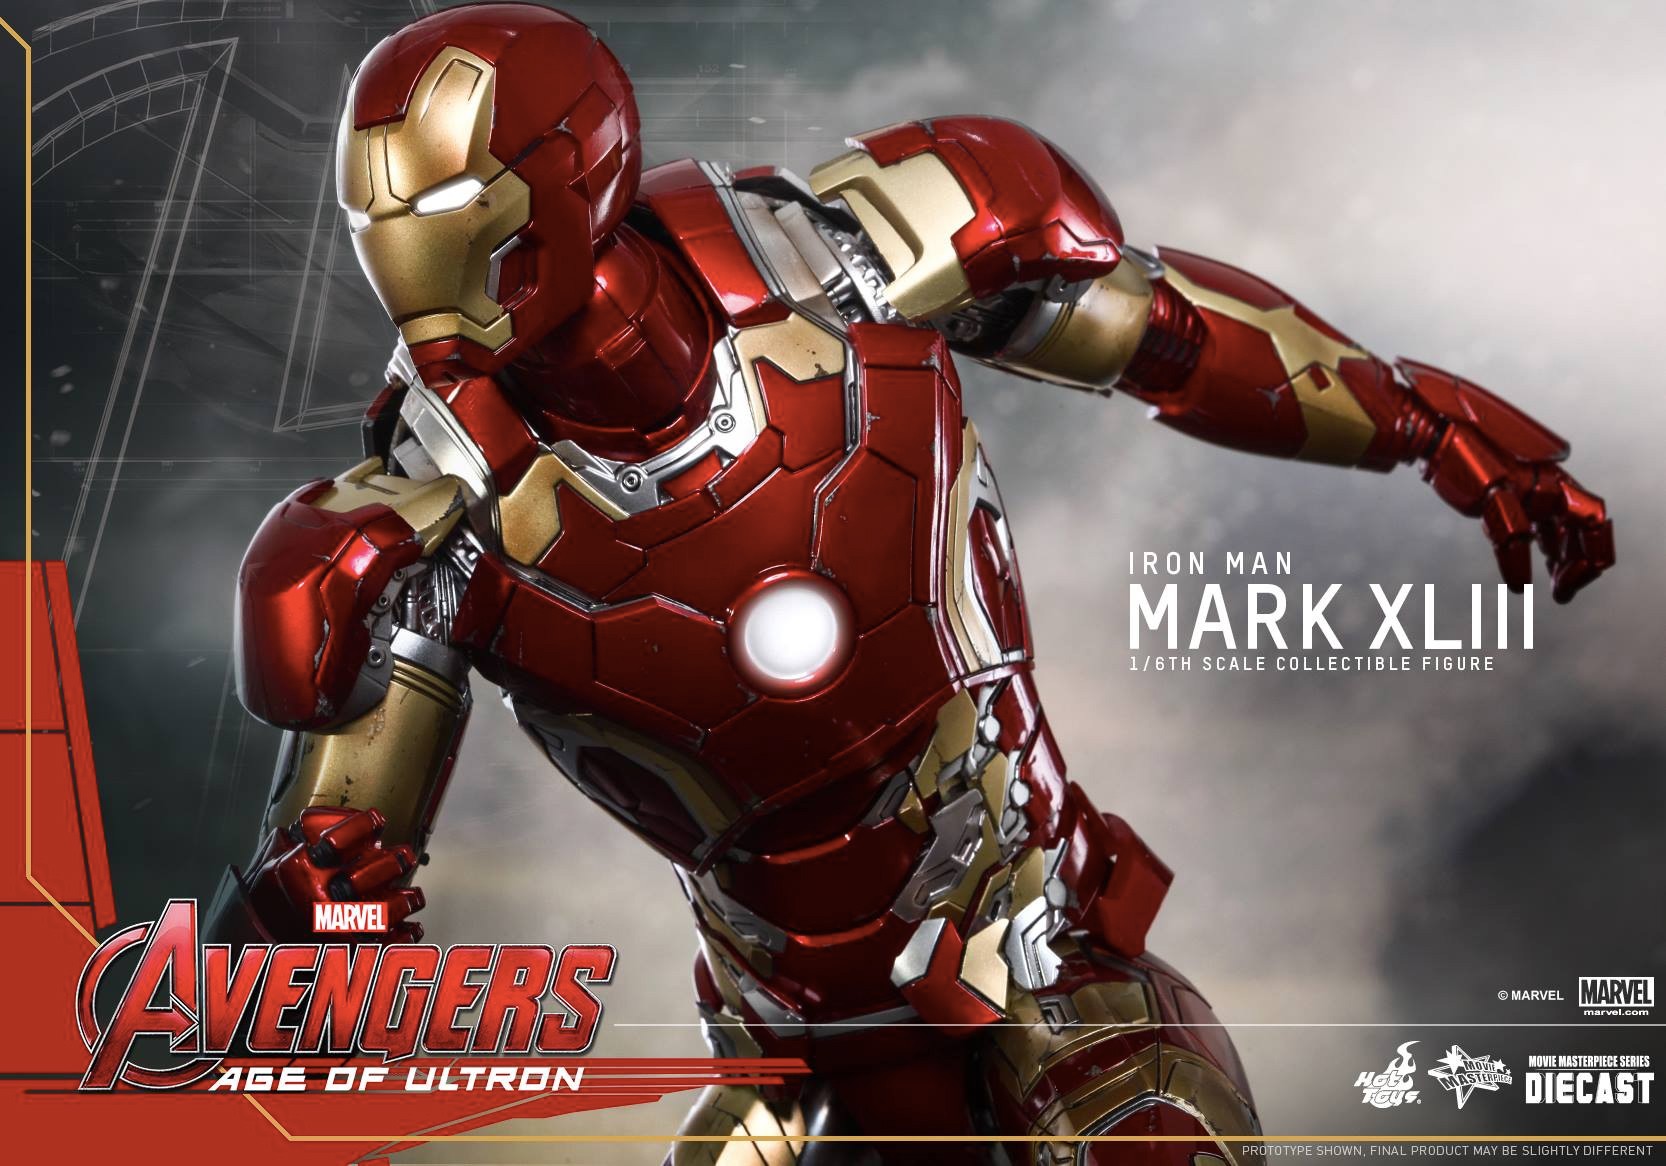 Iron Man, The Avengers, Figurines, Avengers: Age of Ultron Wallpaper